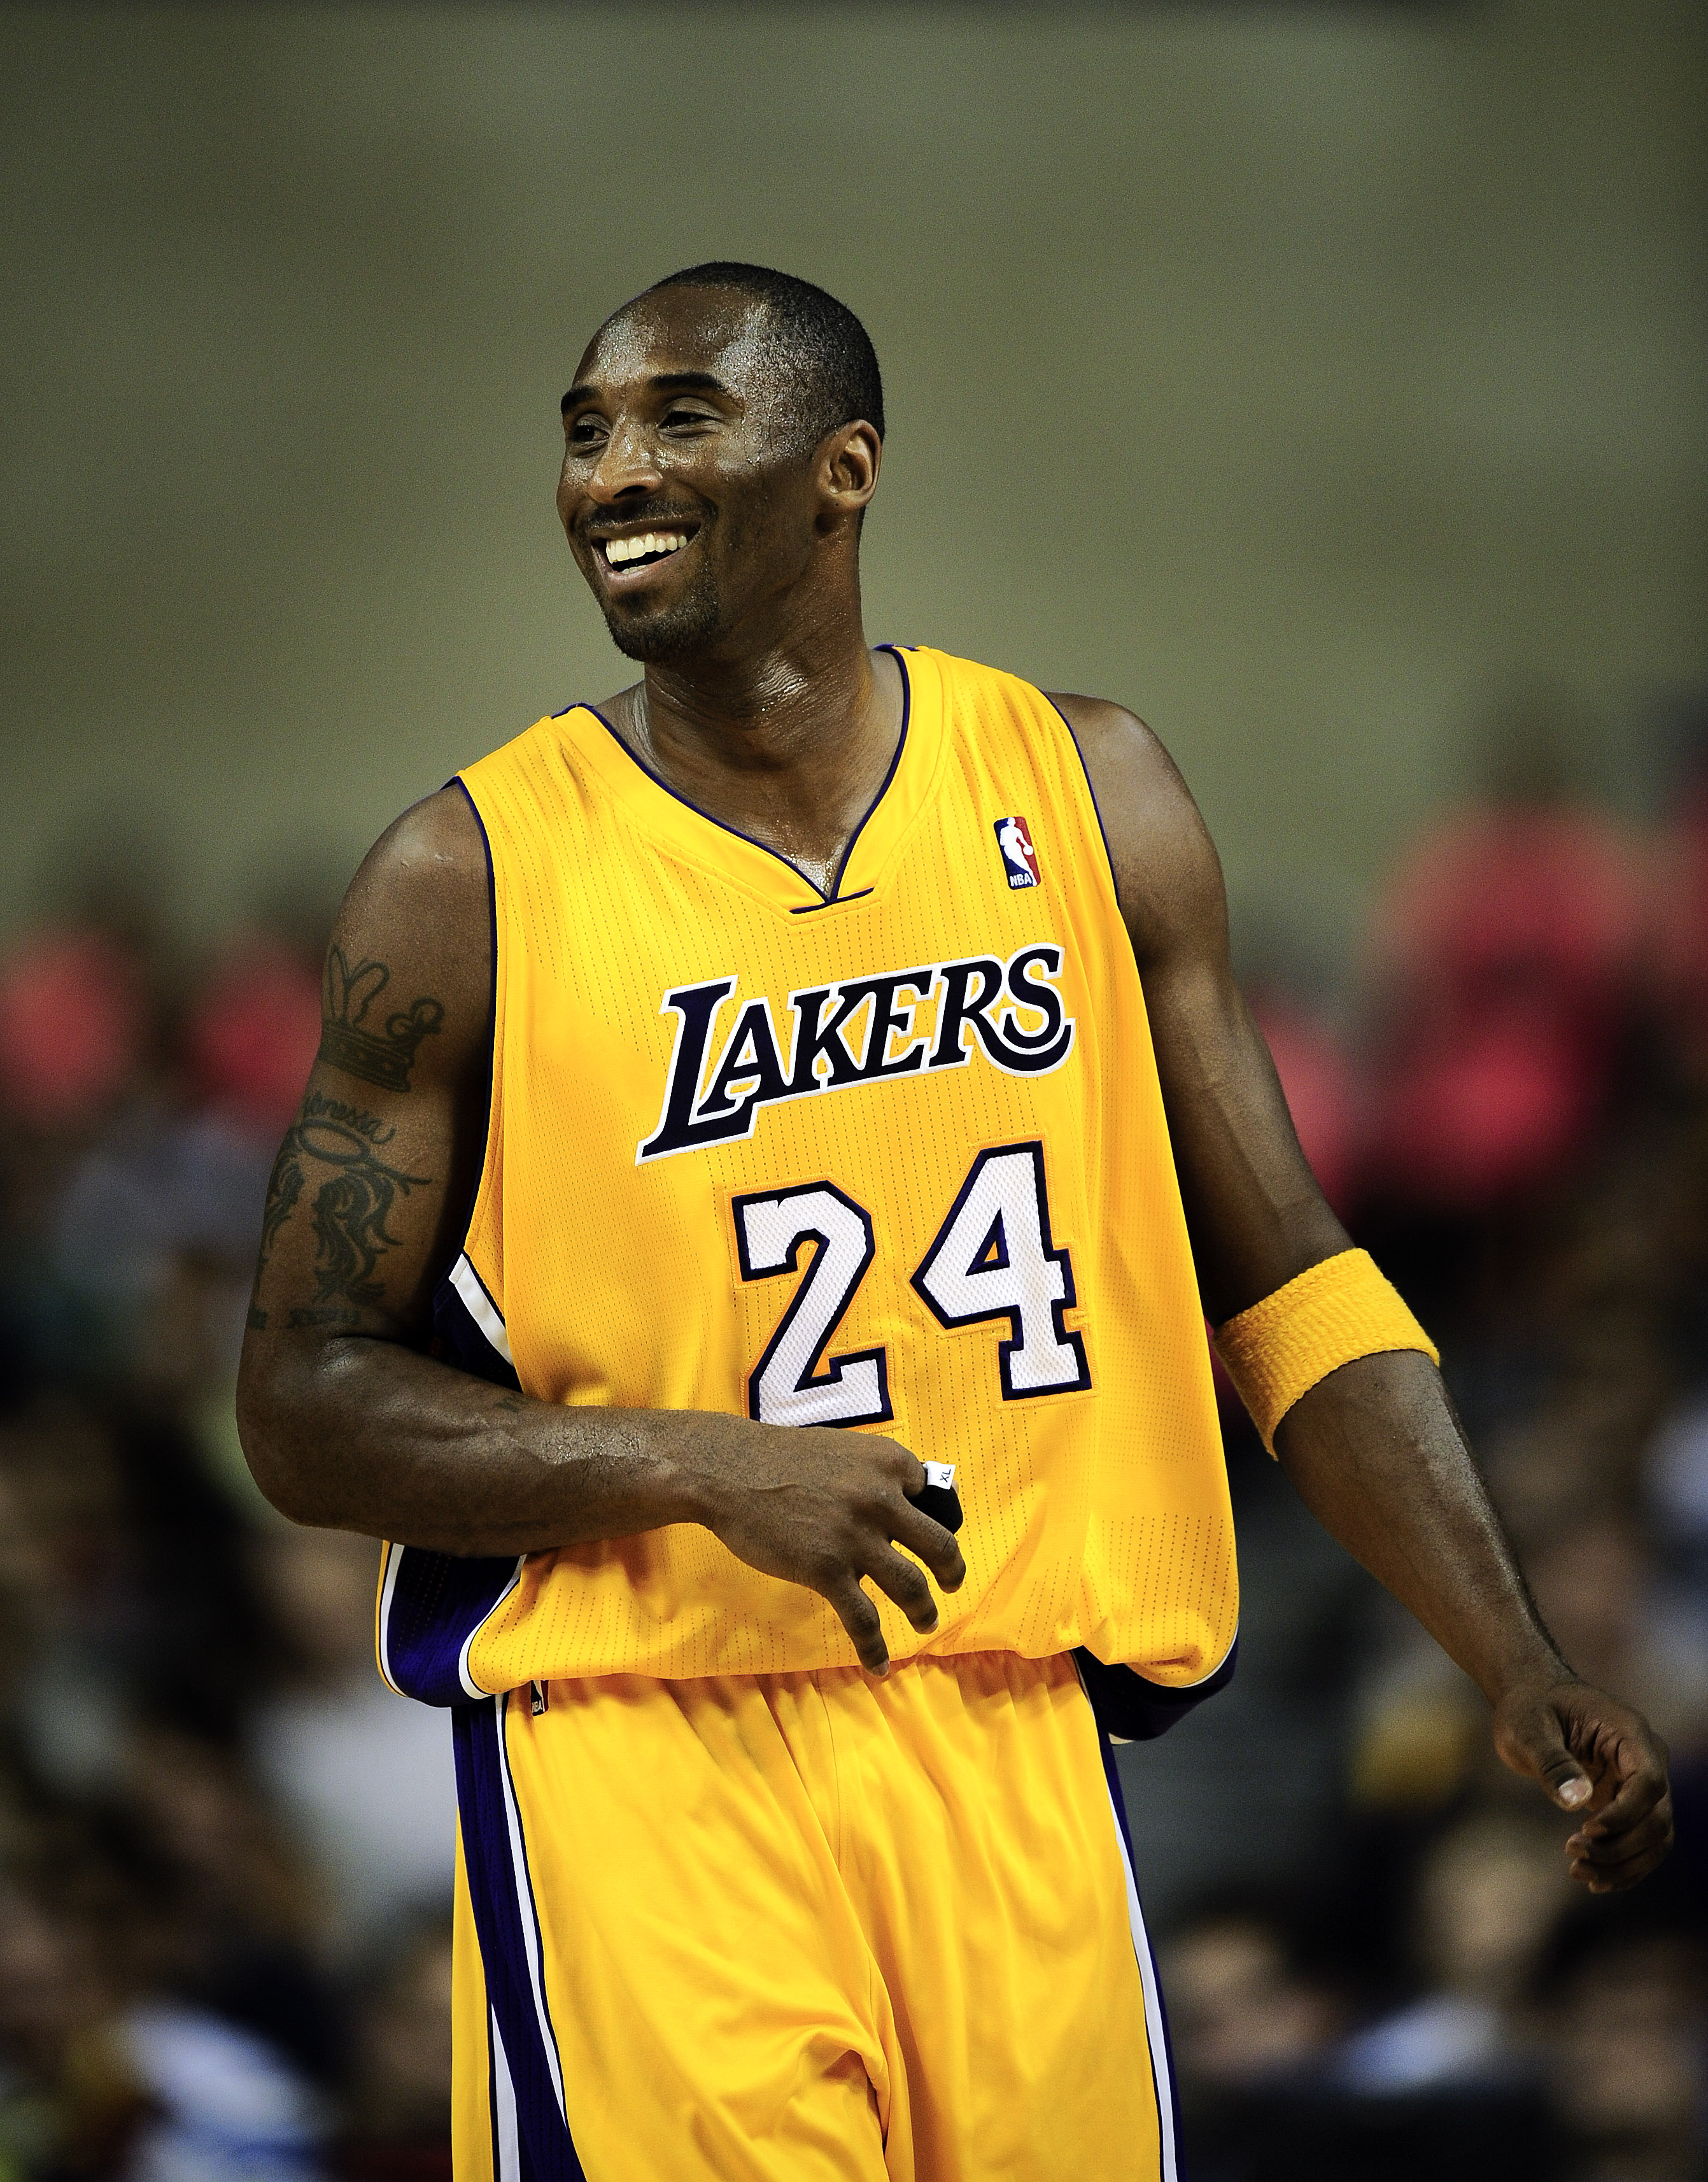 Kobe Bryant's Trophy Case: A Look at The Black Mamba's Top Awards & Records | Bleacher ...